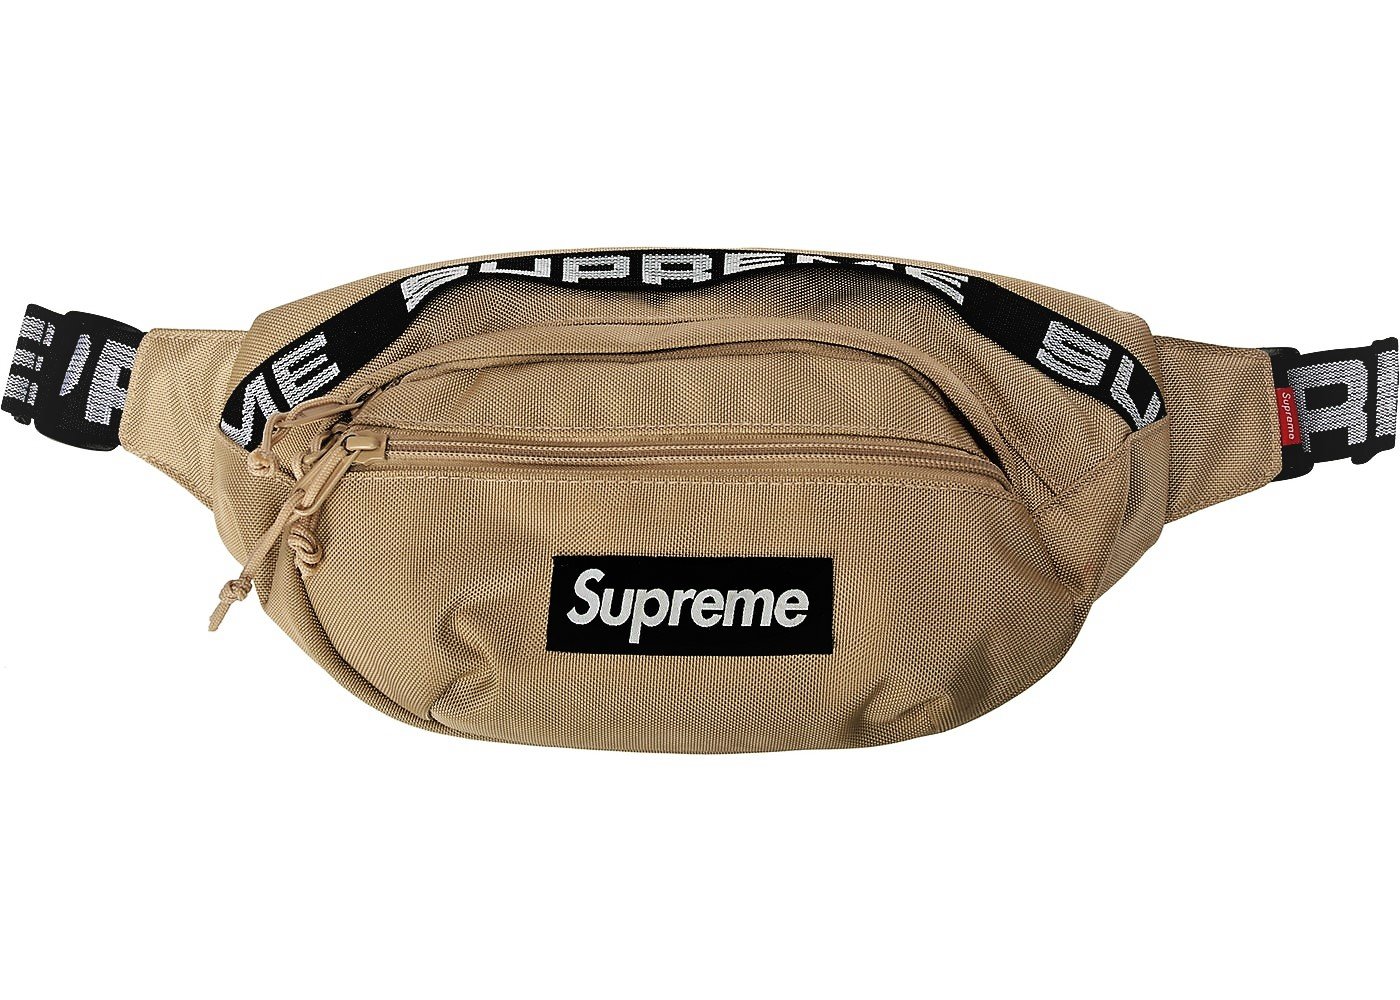 Supreme Fanny Pack Picture For Roblox Nar Media Kit - supreme fanny pack roblox